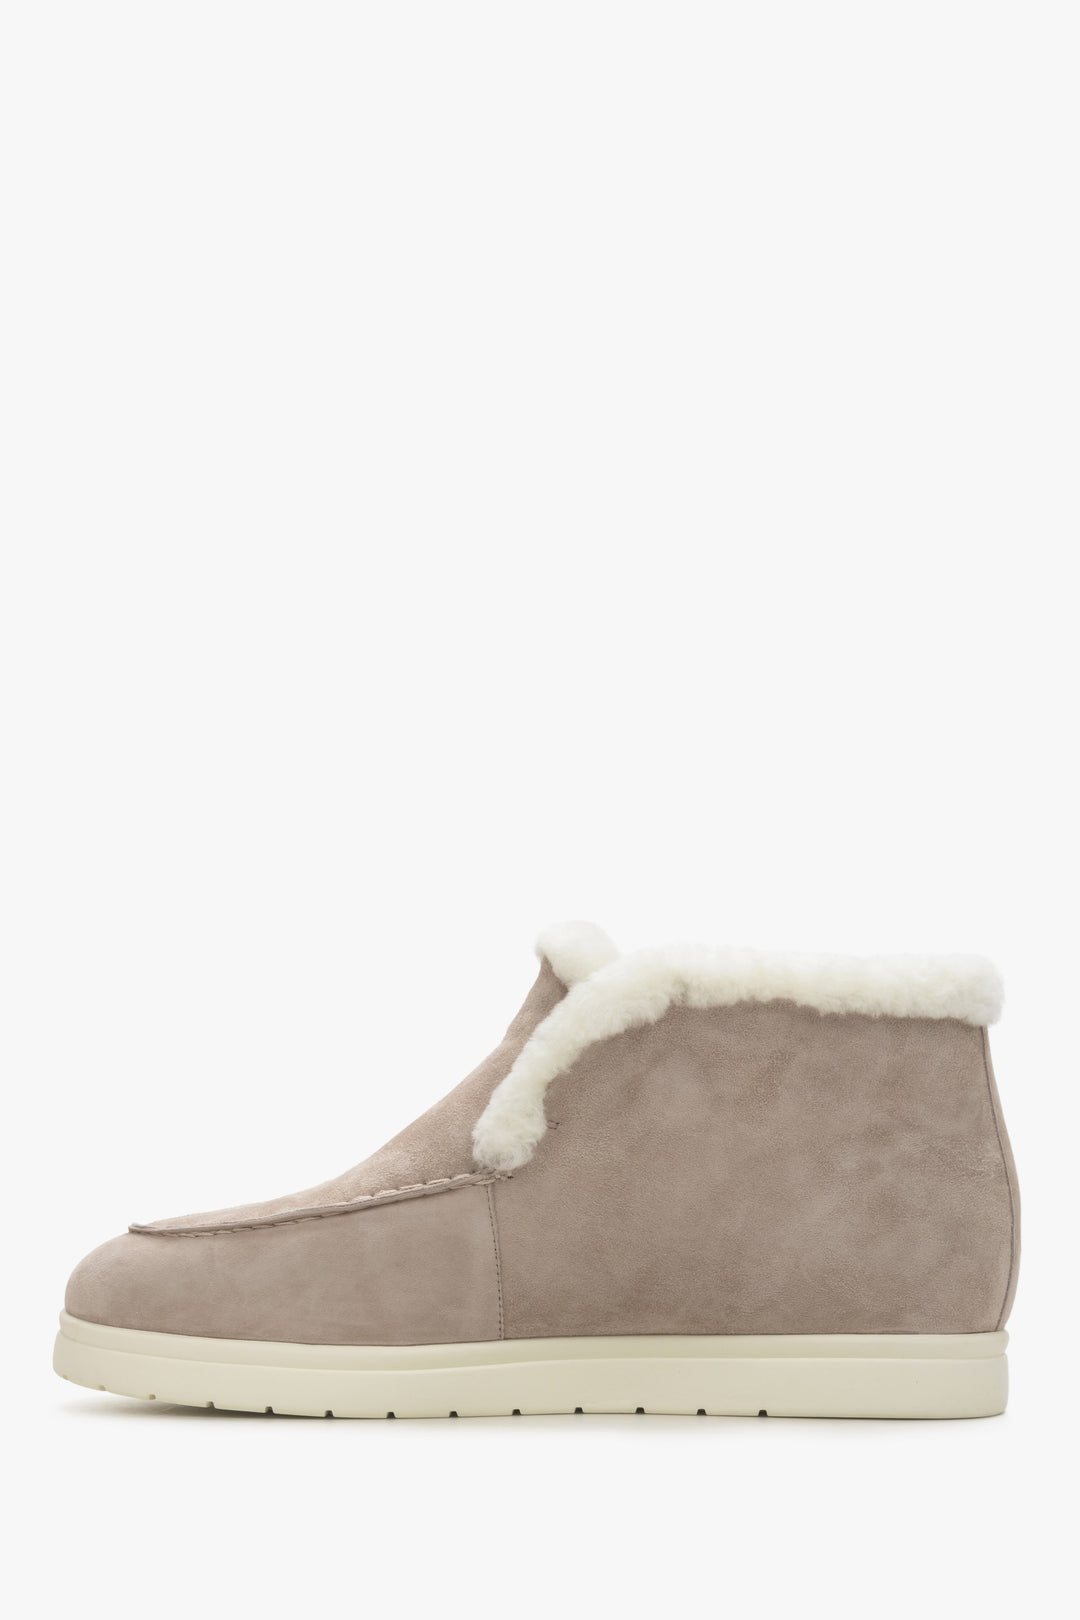 Women's low-top boots made of velour and fur in pale pink colour Estro - shoe profile.